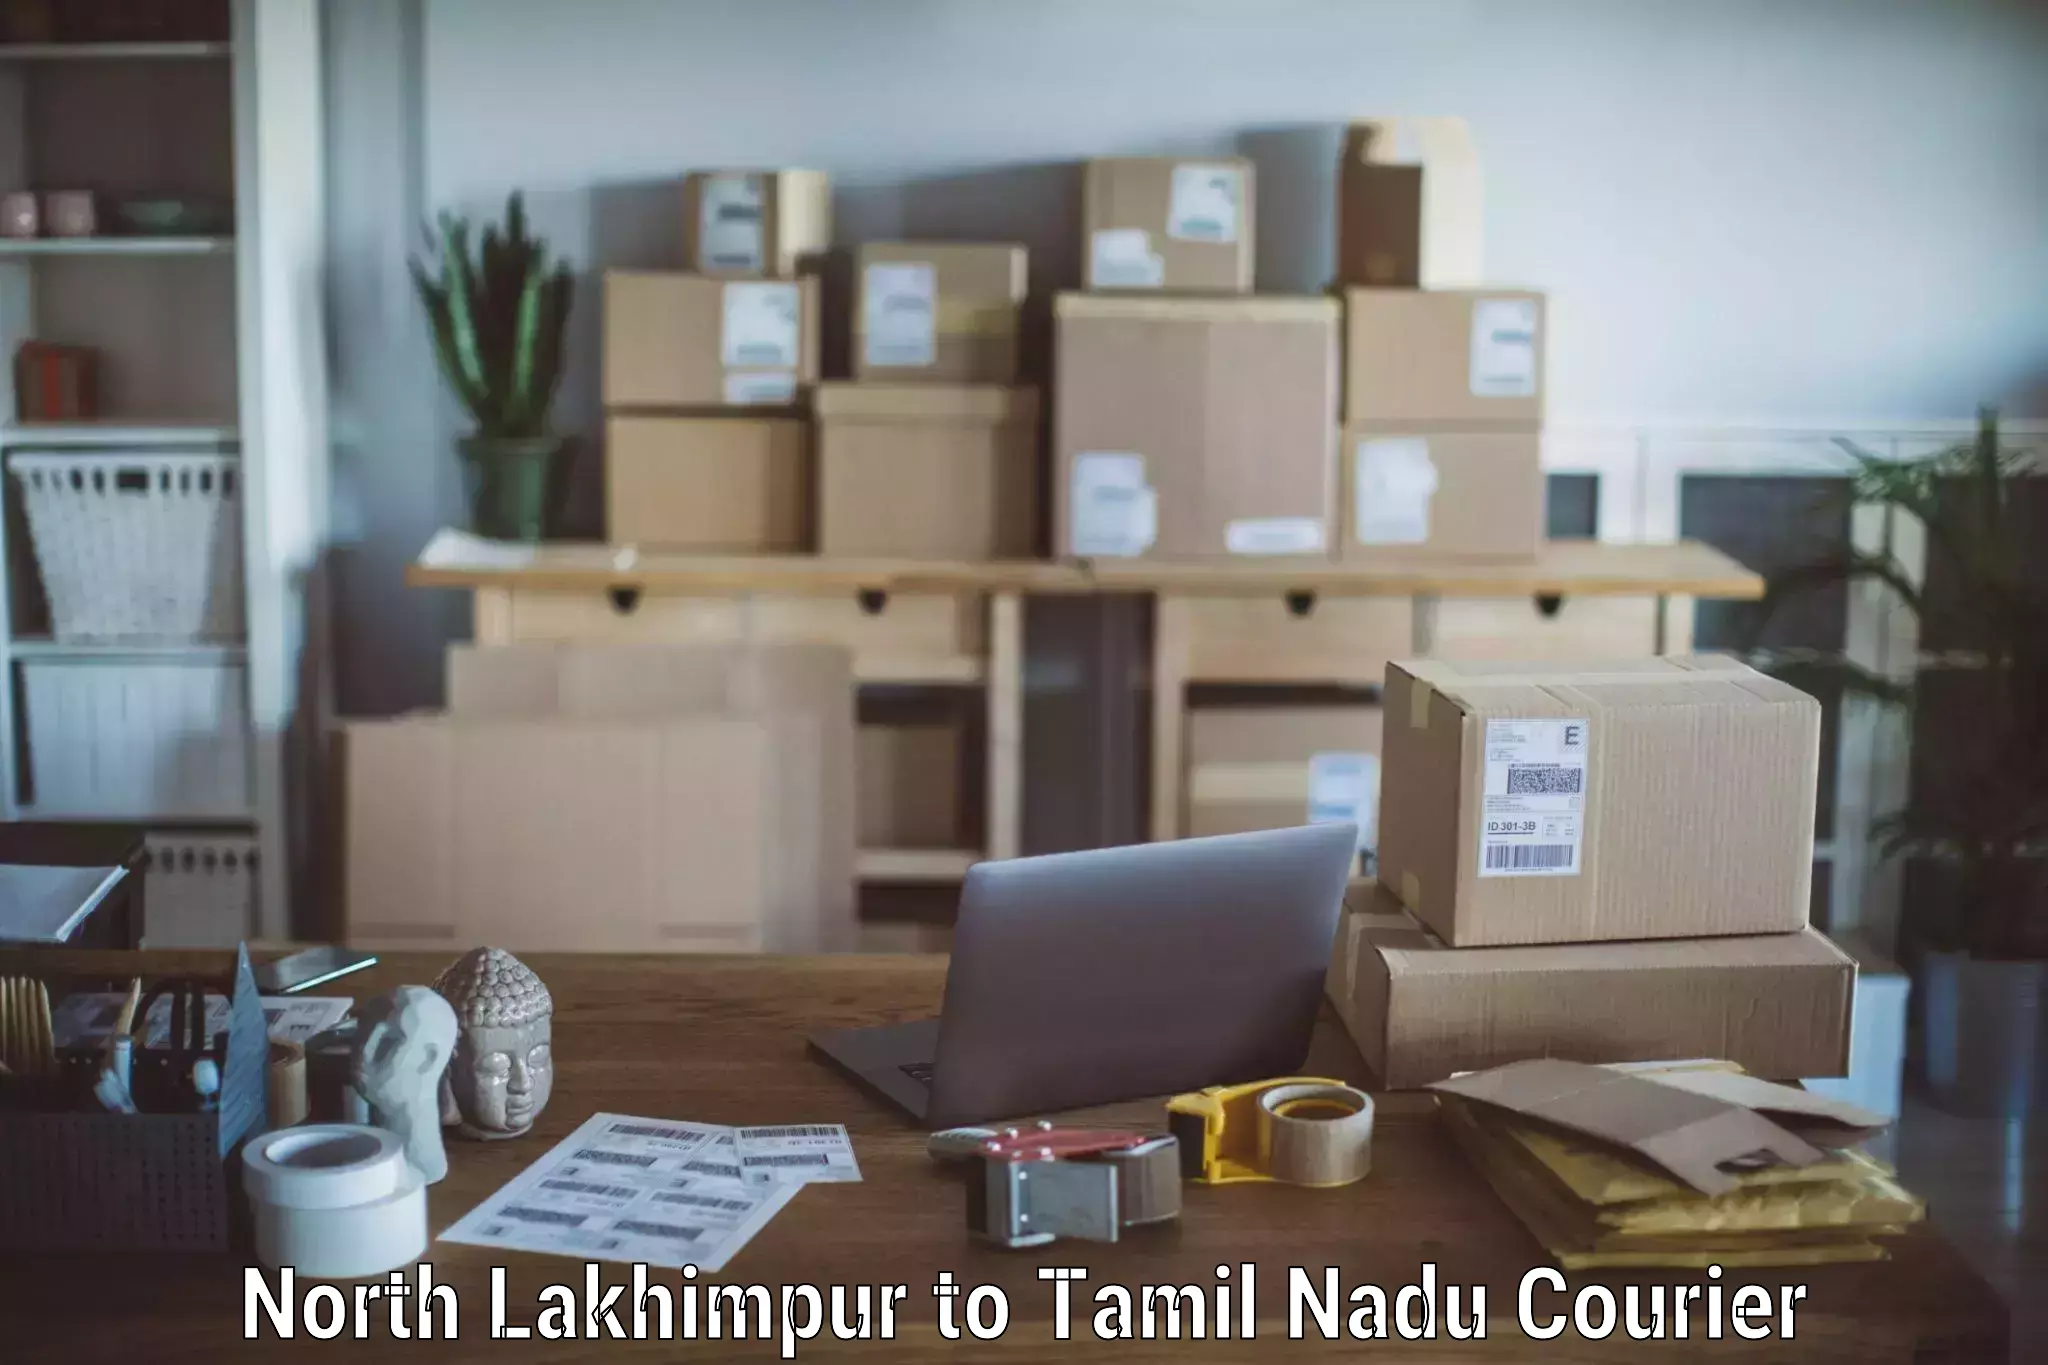 Residential moving experts North Lakhimpur to Vellore